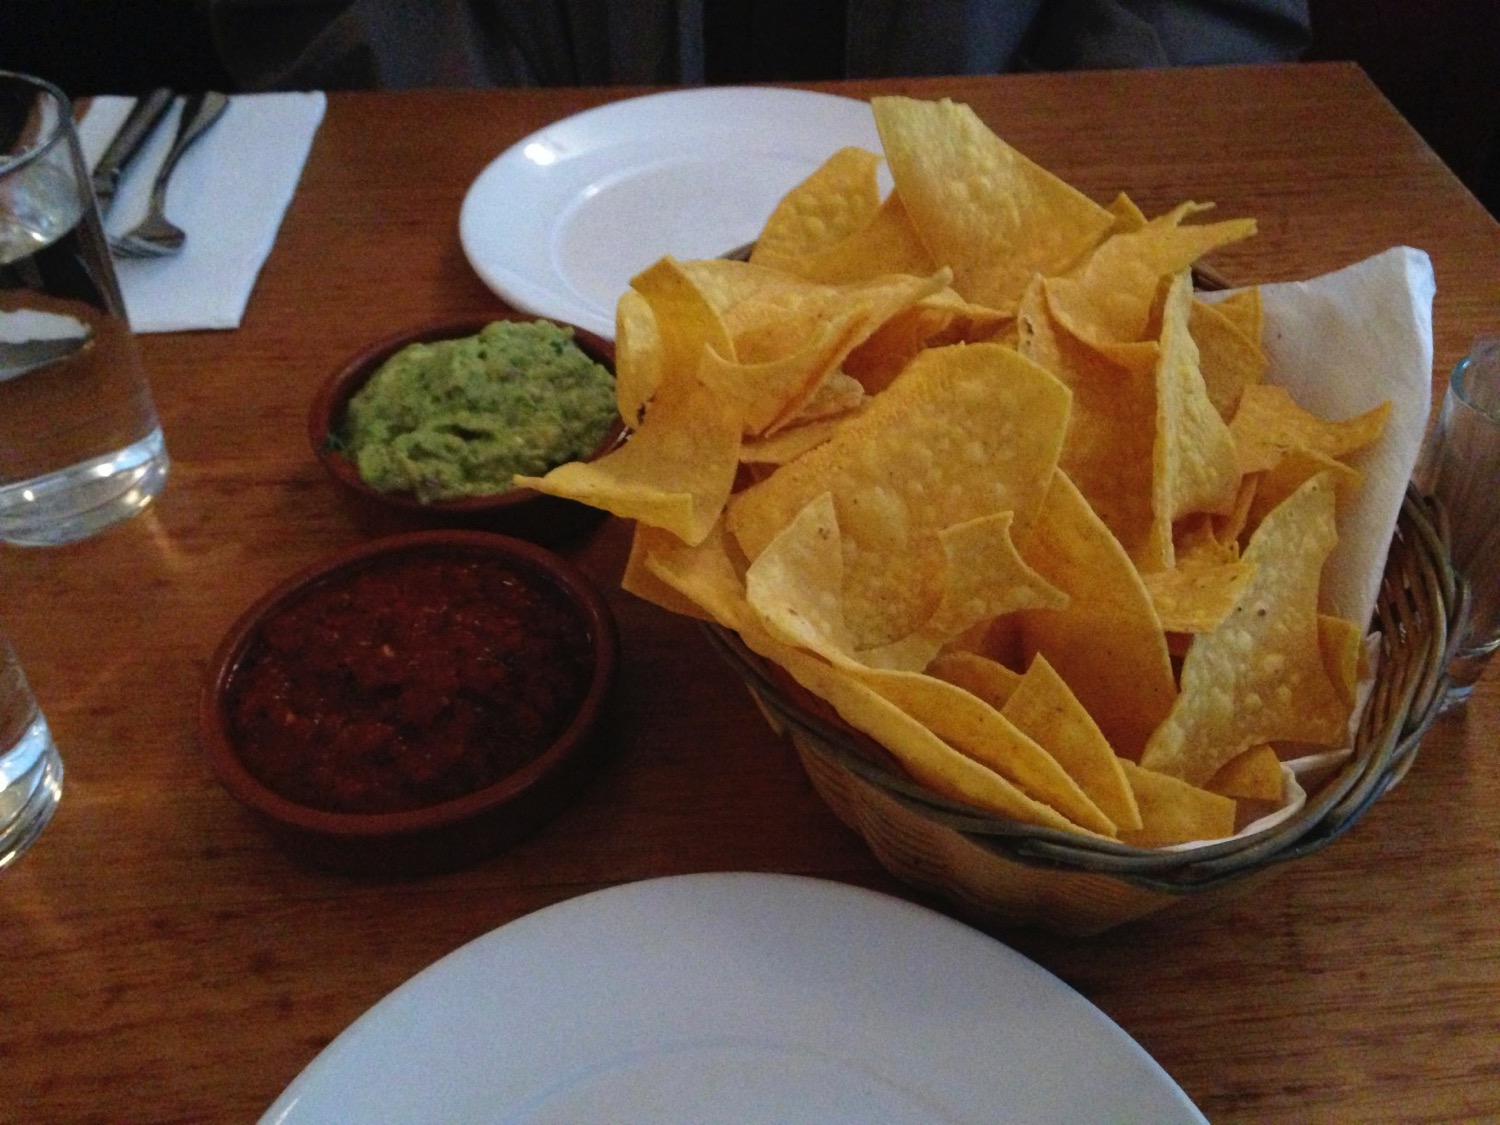 a basket of chips and dips on a table